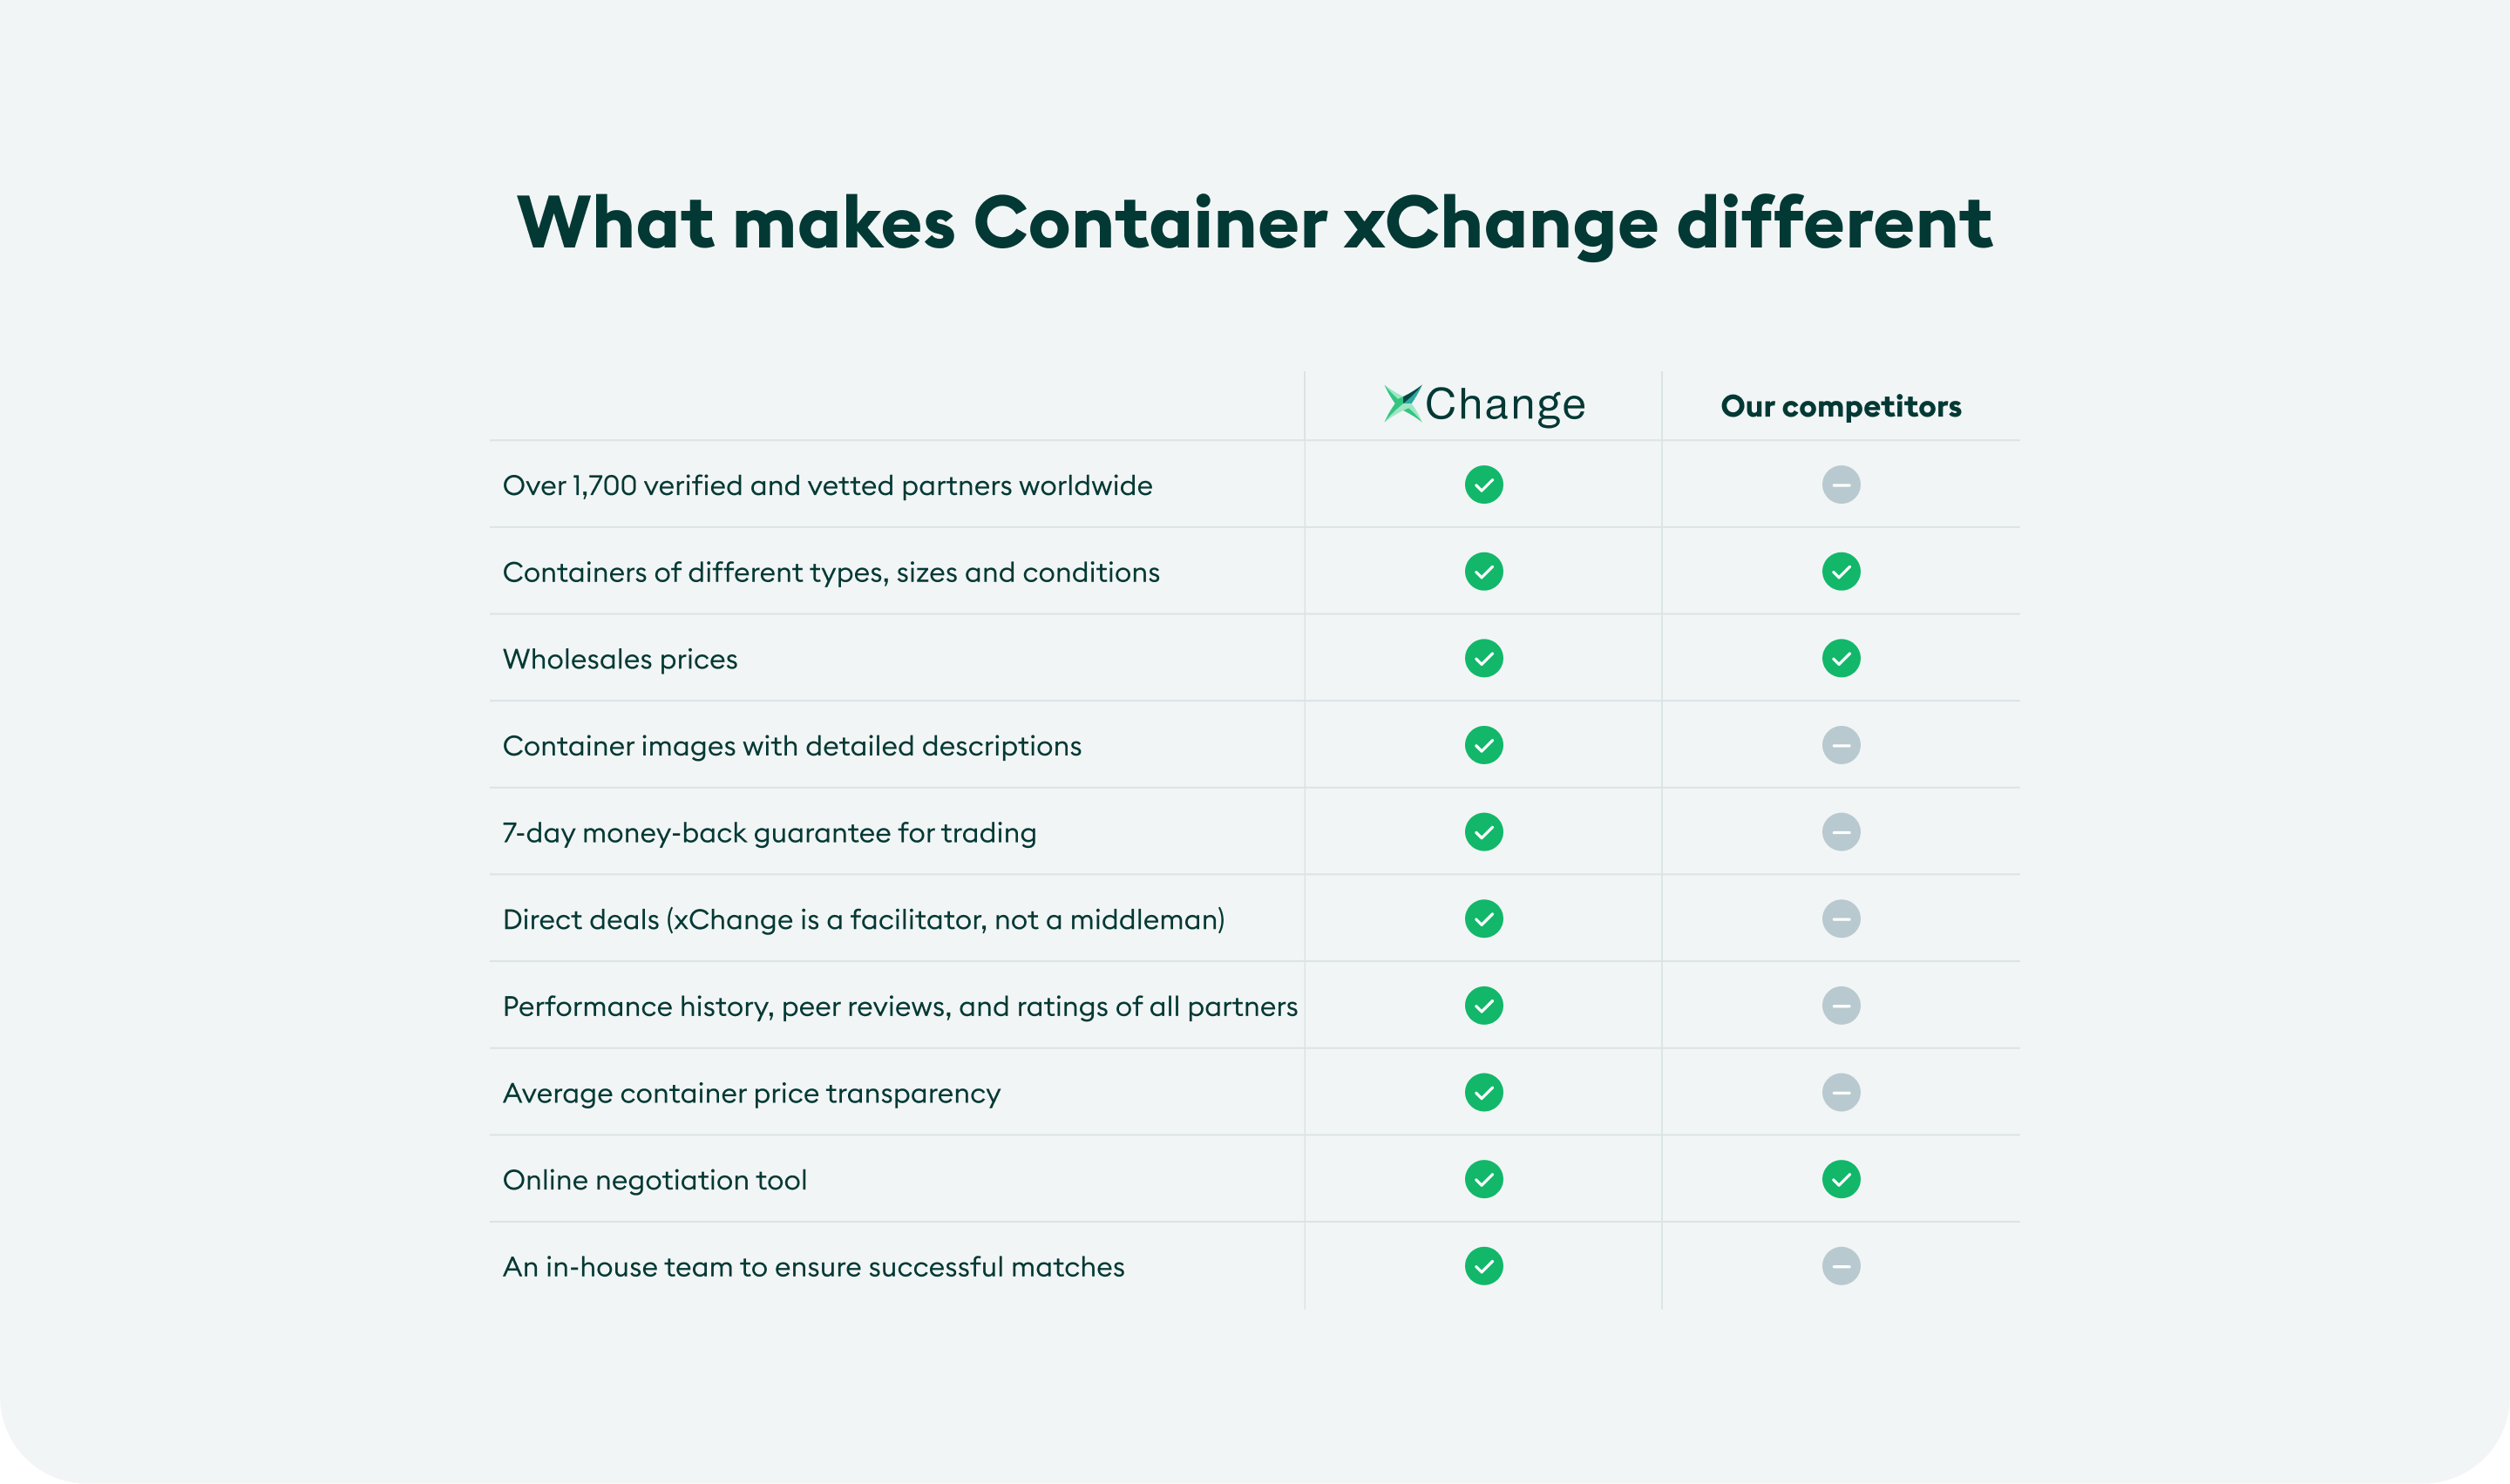 What makes Container xChange different?